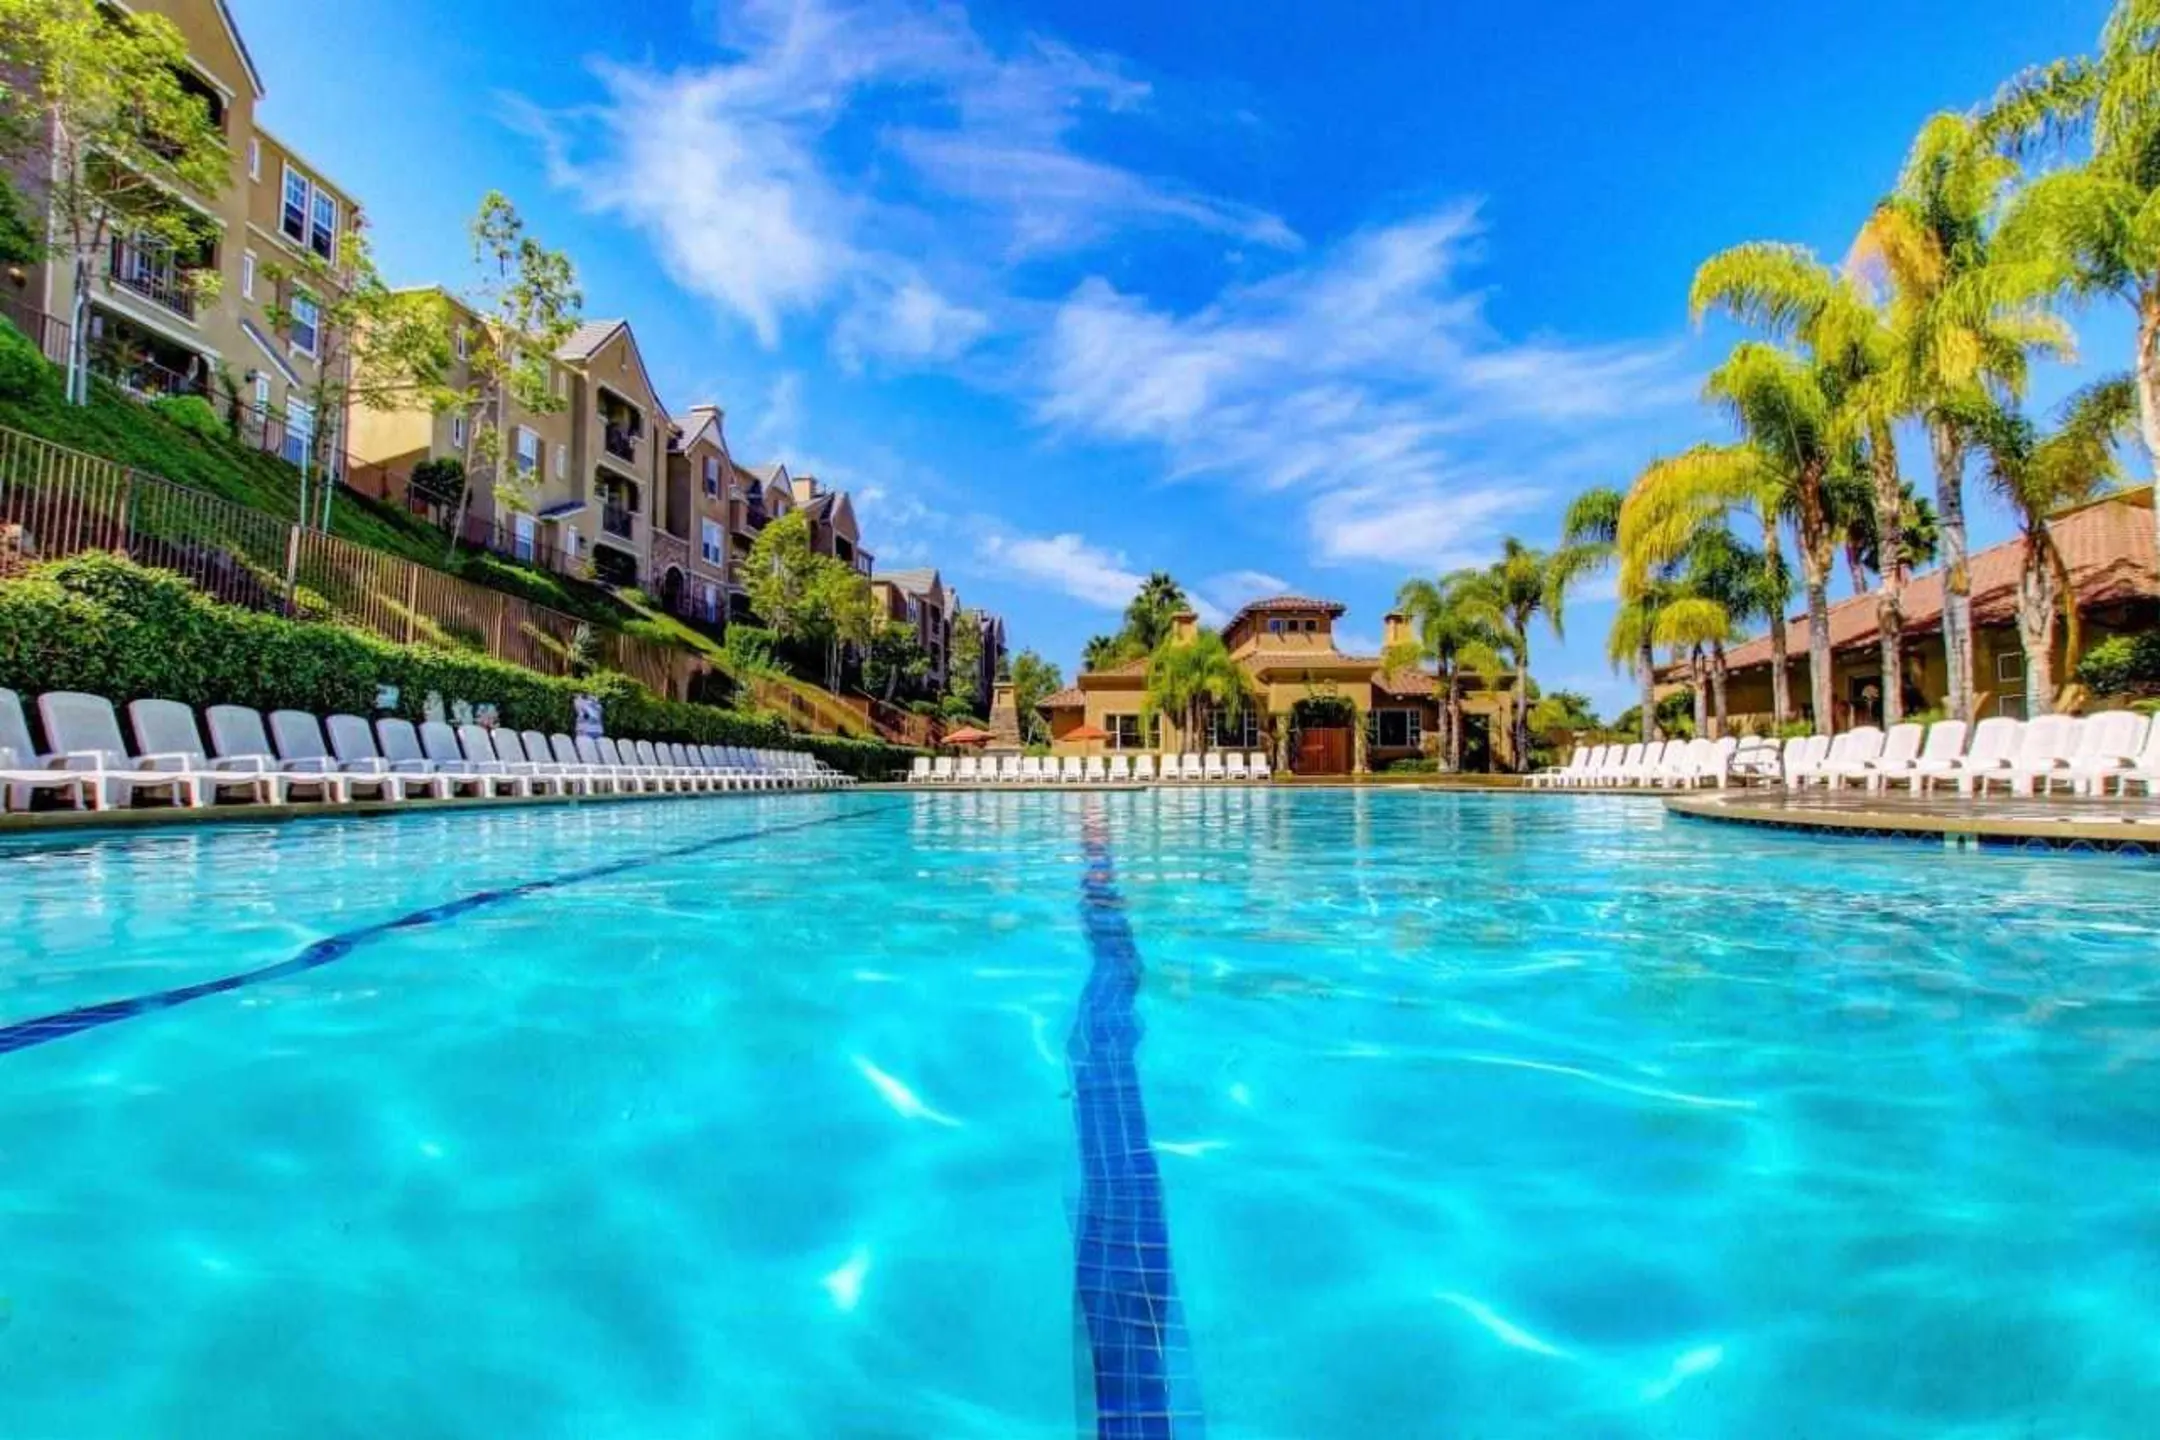 Pool - Prominence Apartments - San Marcos, CA